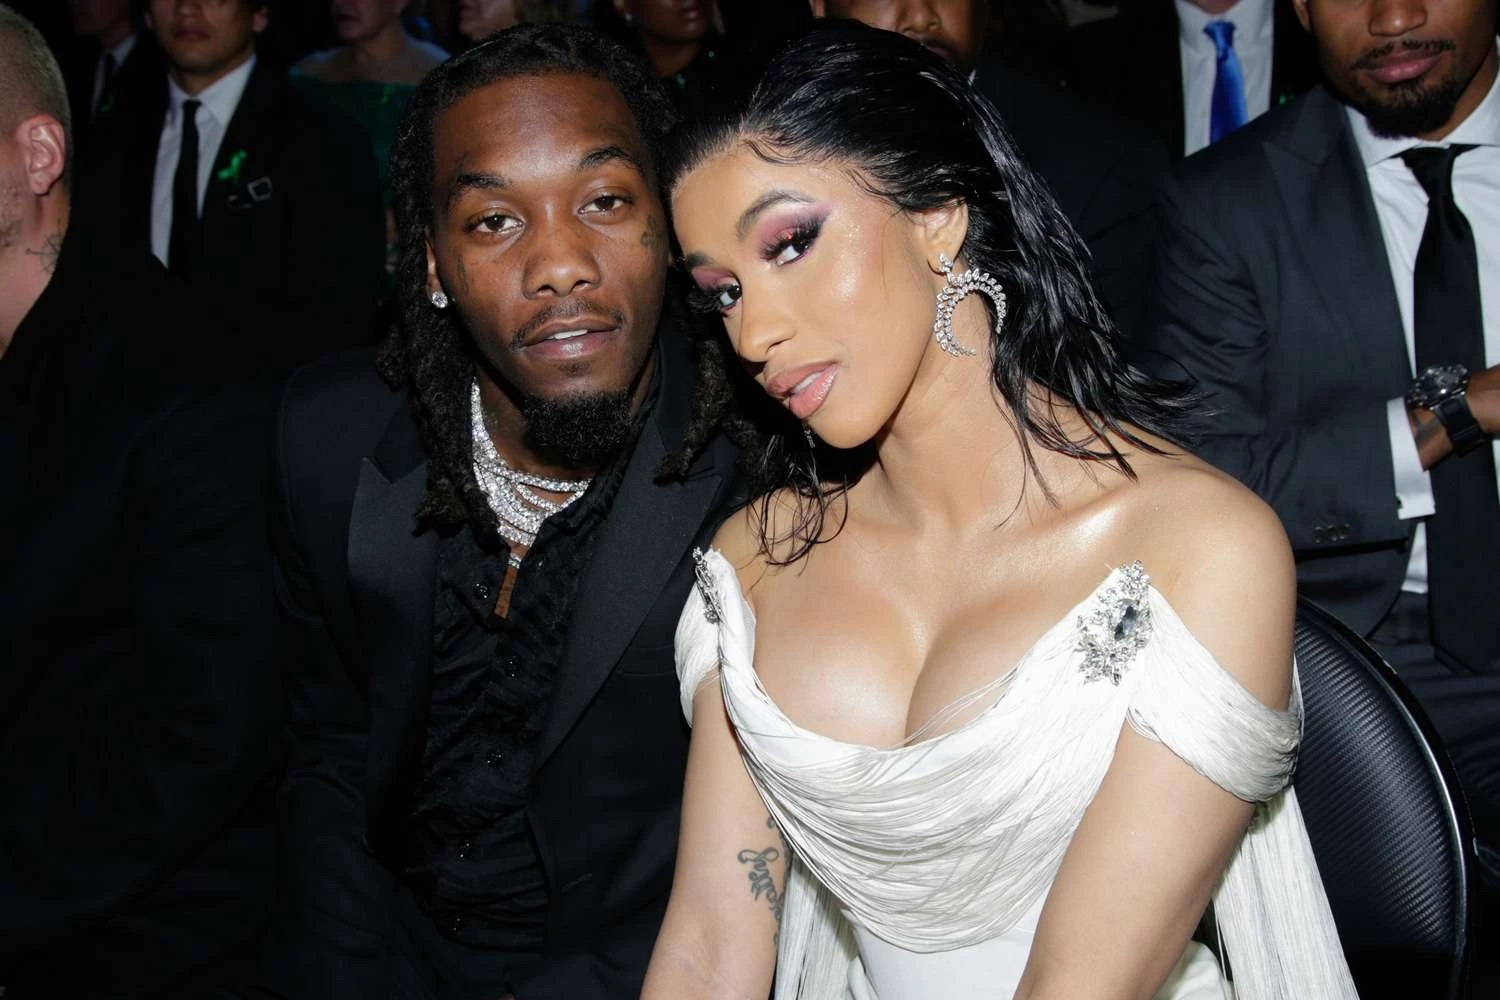 Why did Cardi B and Offset break up?